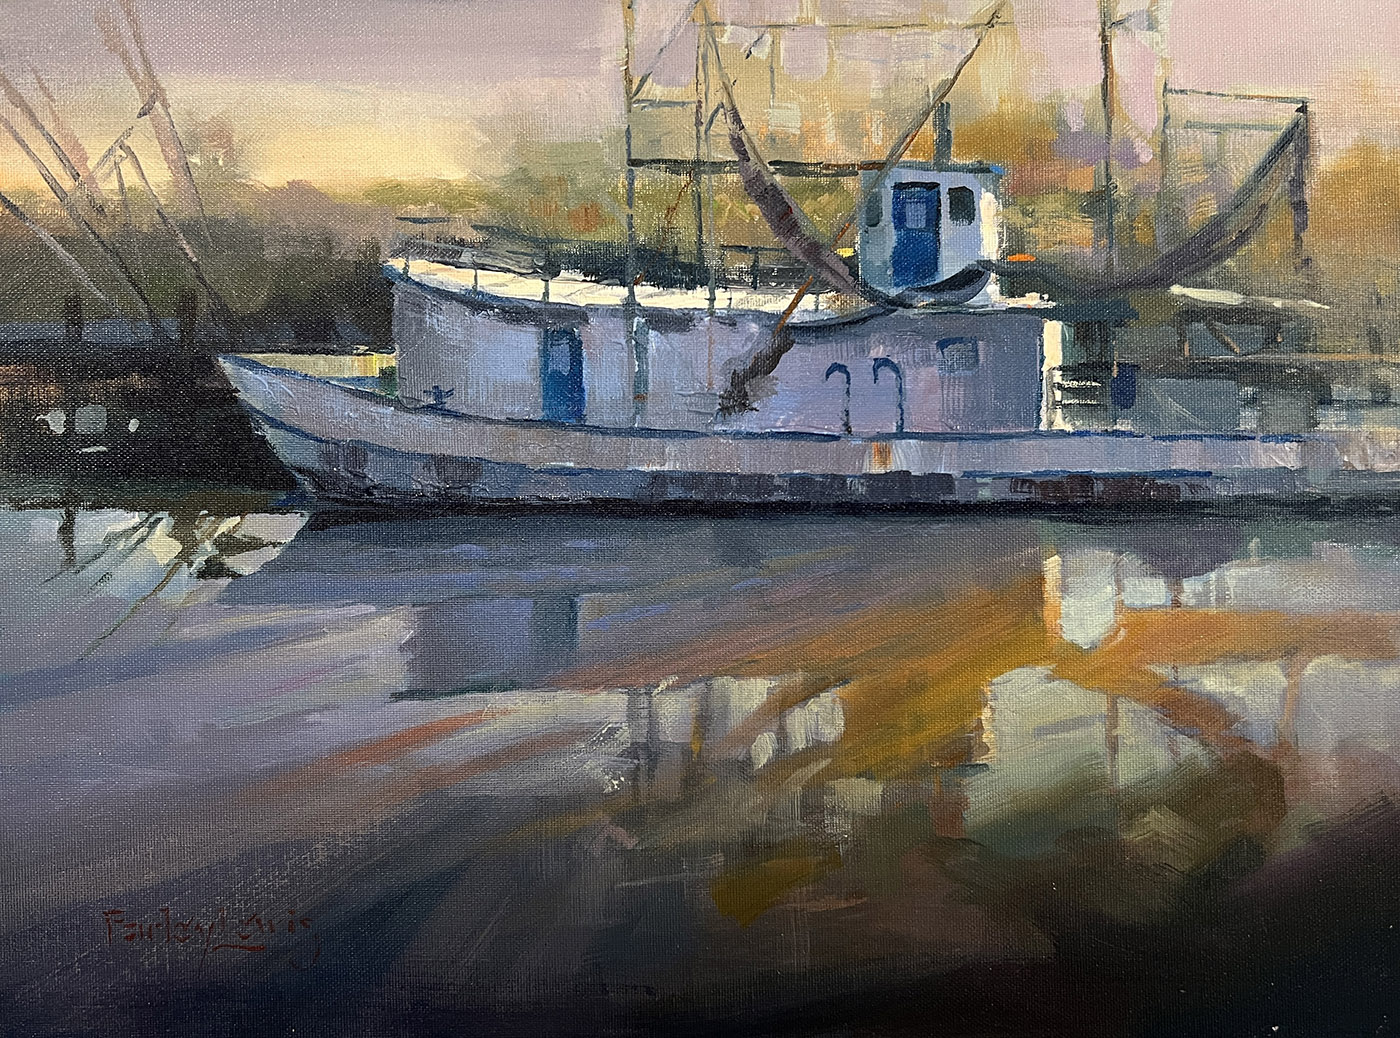 acrylic painting of boat docked in water, during sunrise